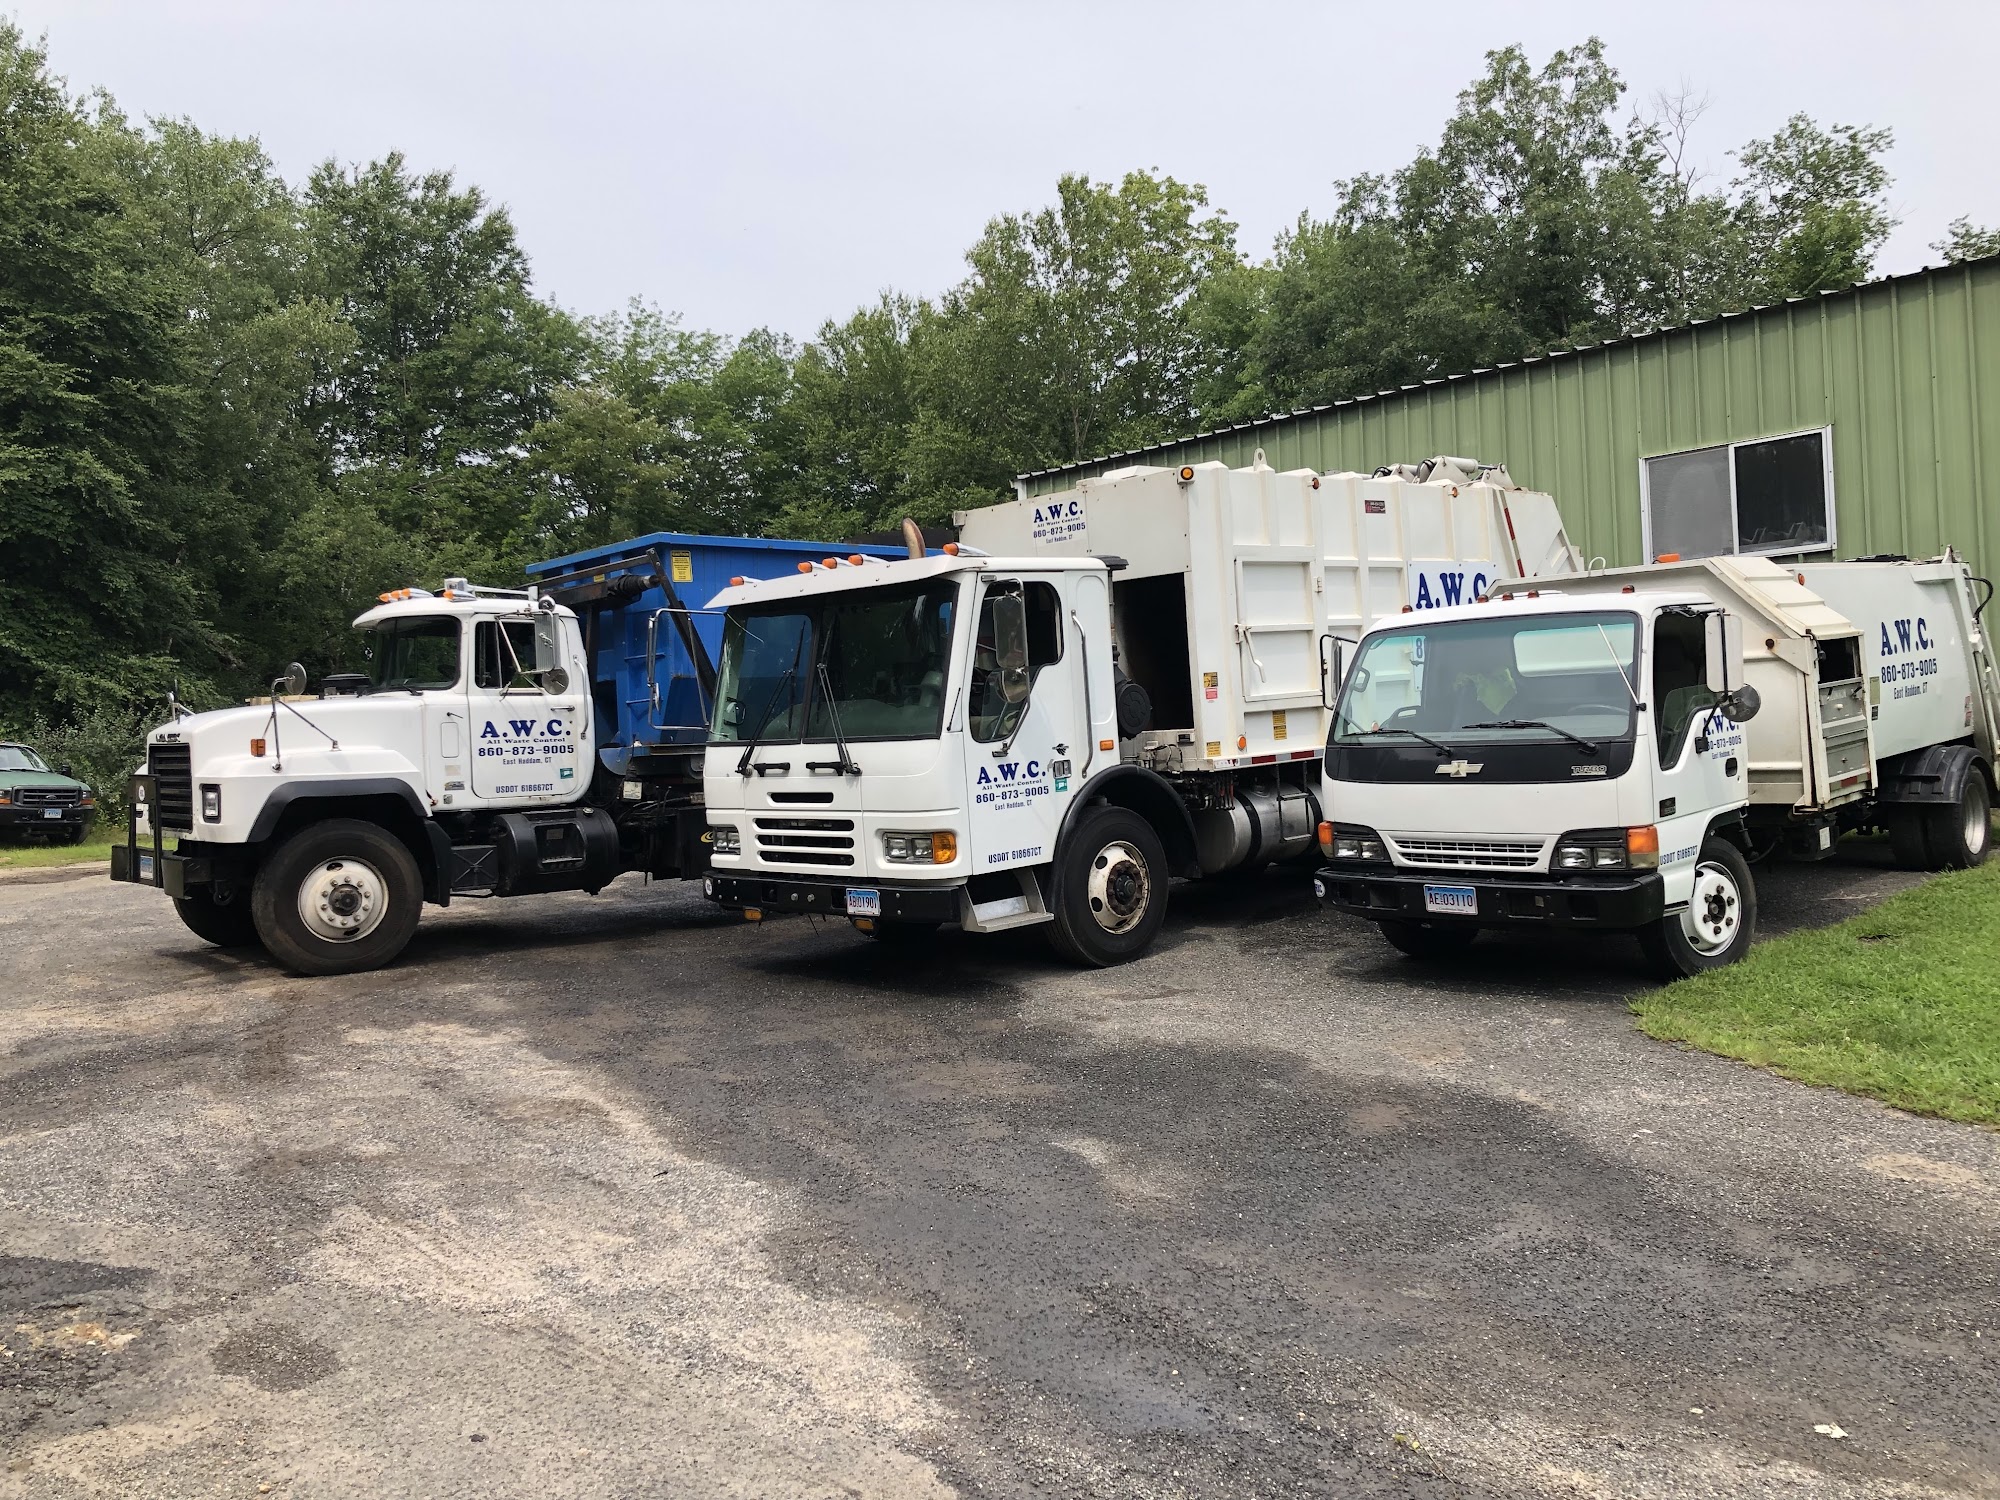 All Waste Control, Inc. 353 Town St, East Haddam Connecticut 06423